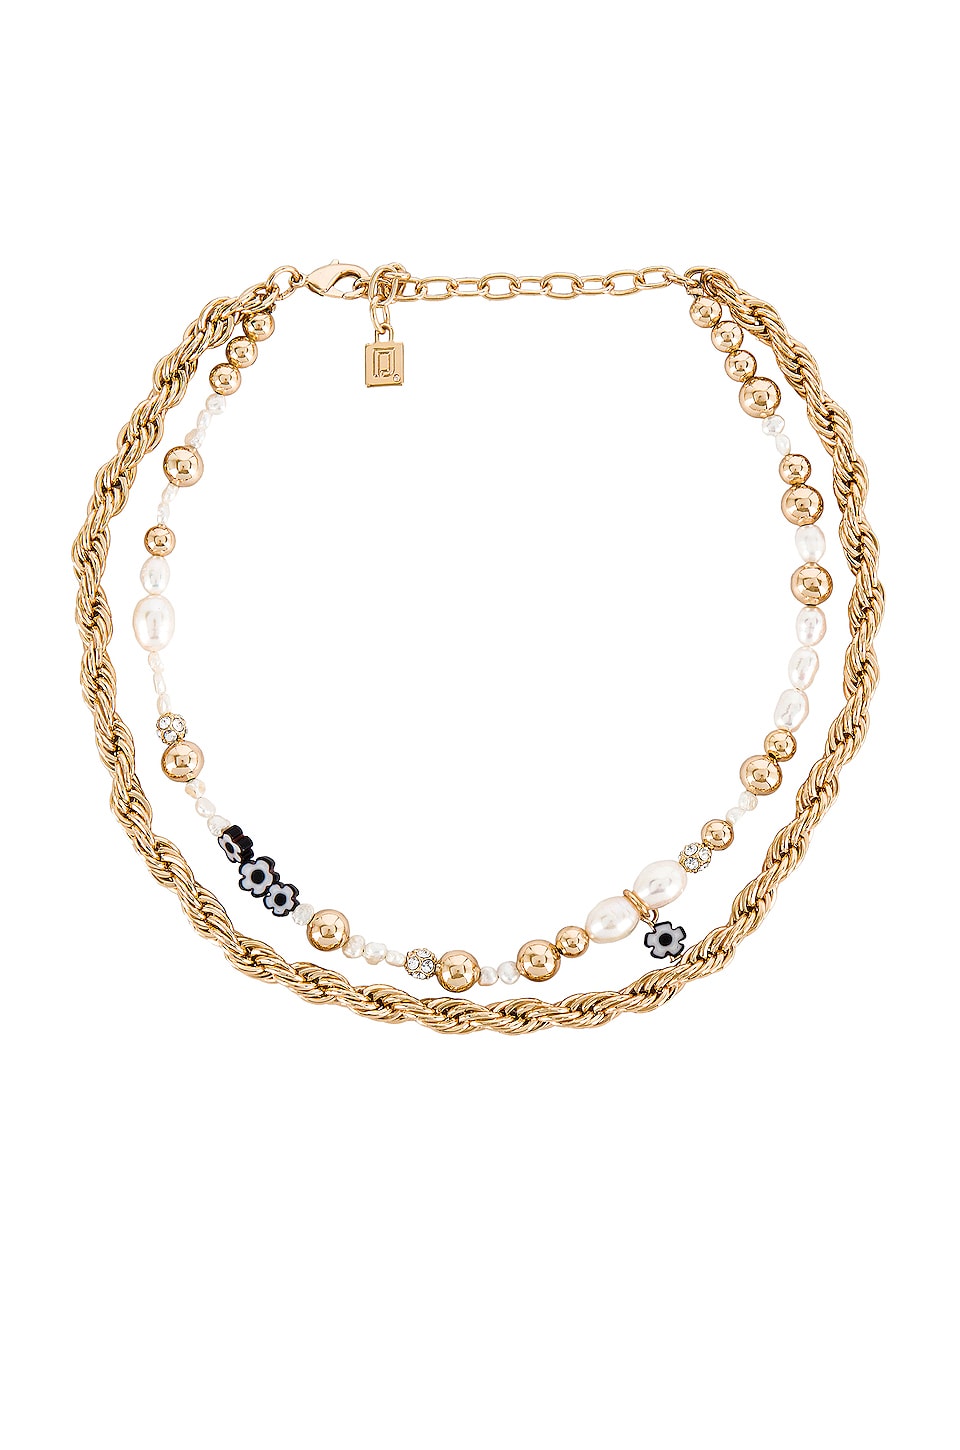 DANNIJO Lucy Necklace in Gold | REVOLVE